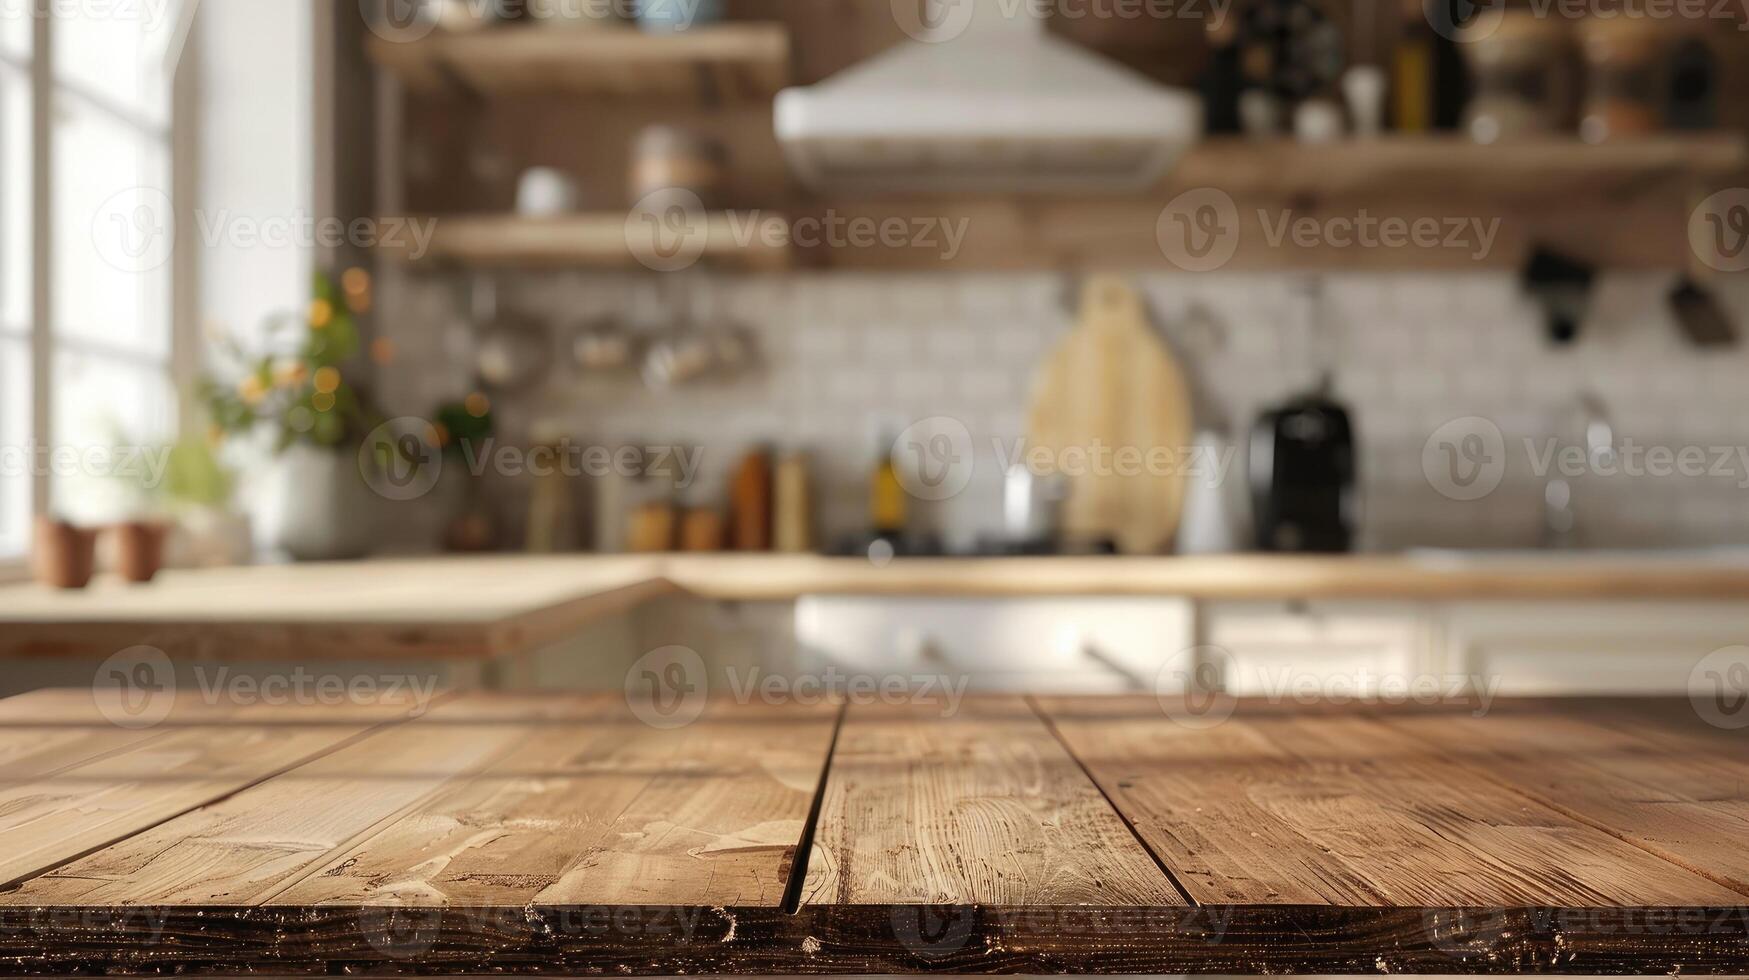 Wooden tabletop against blurred kitchen background for product mockups and display montages on scandinavian style photo